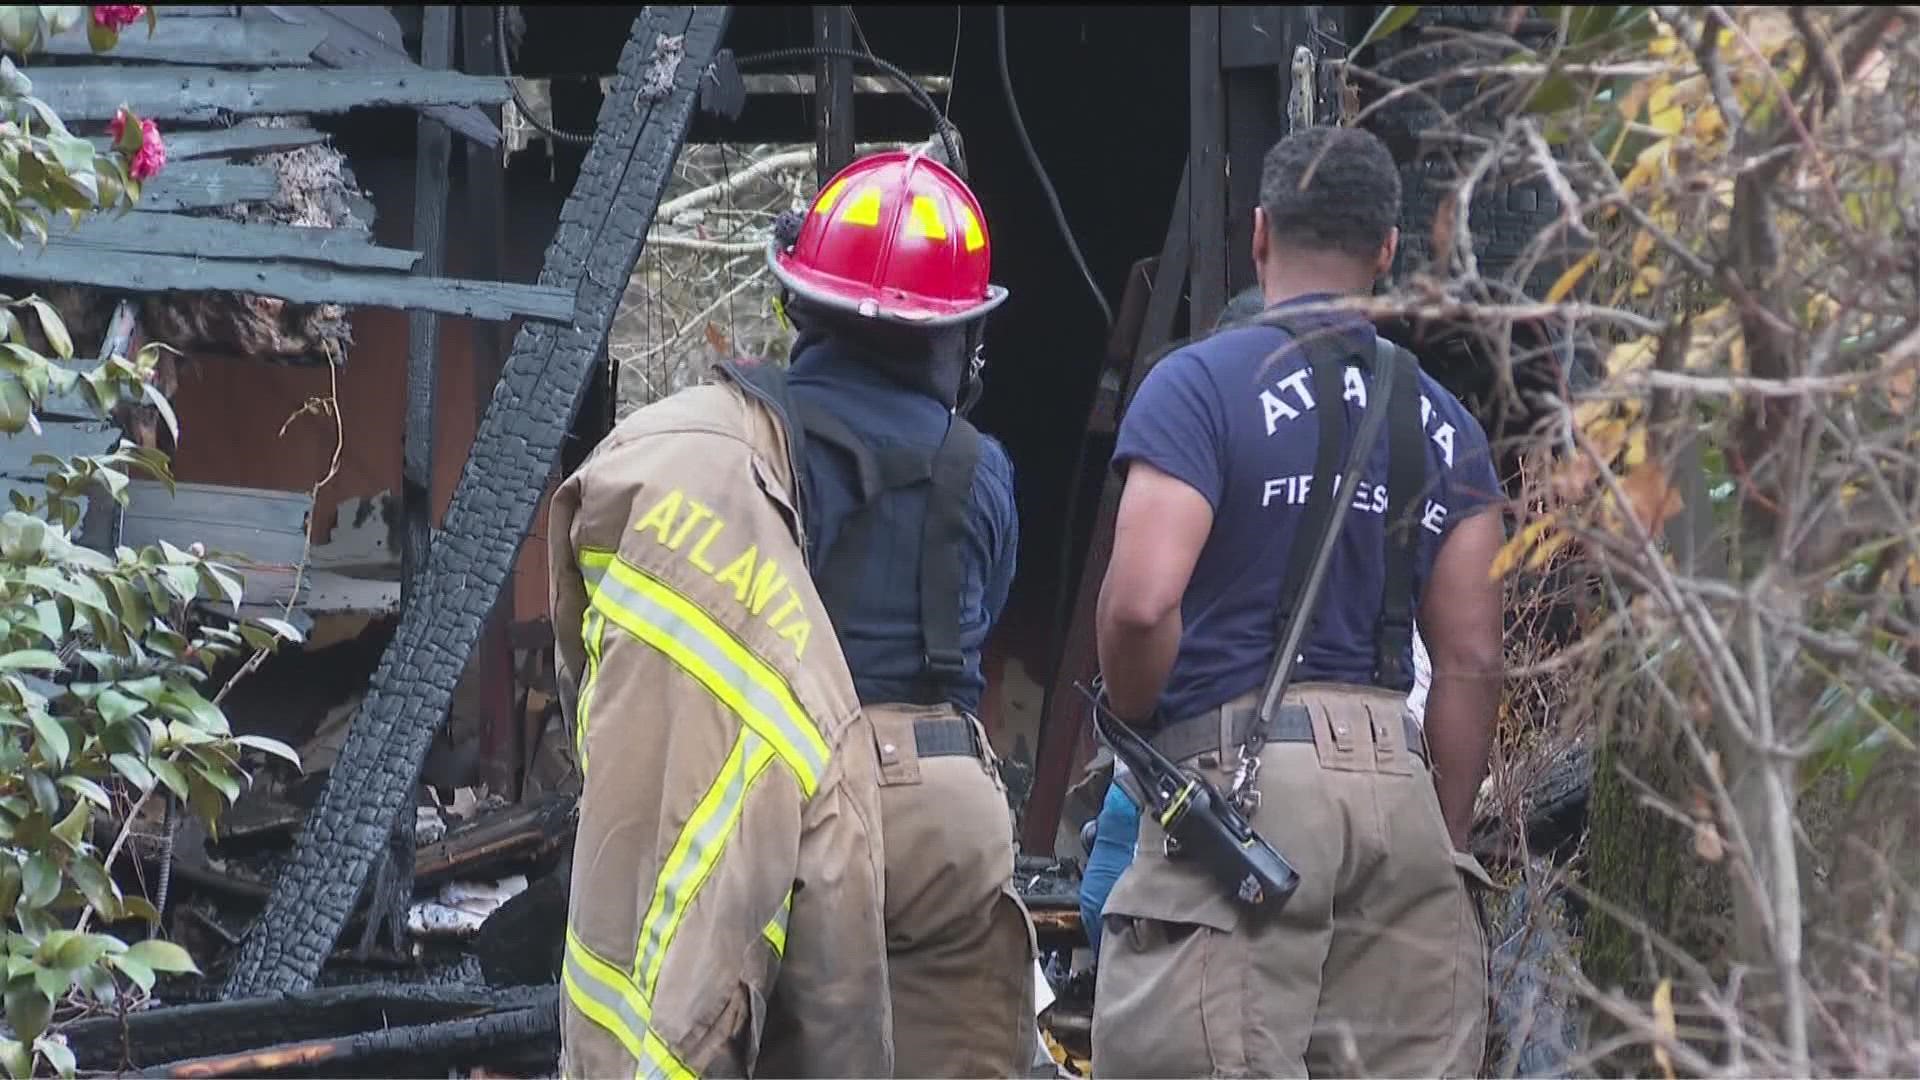 Fire investigators also found a charred, loaded 12 gauge pump action shotgun in the remaining structure of the house.